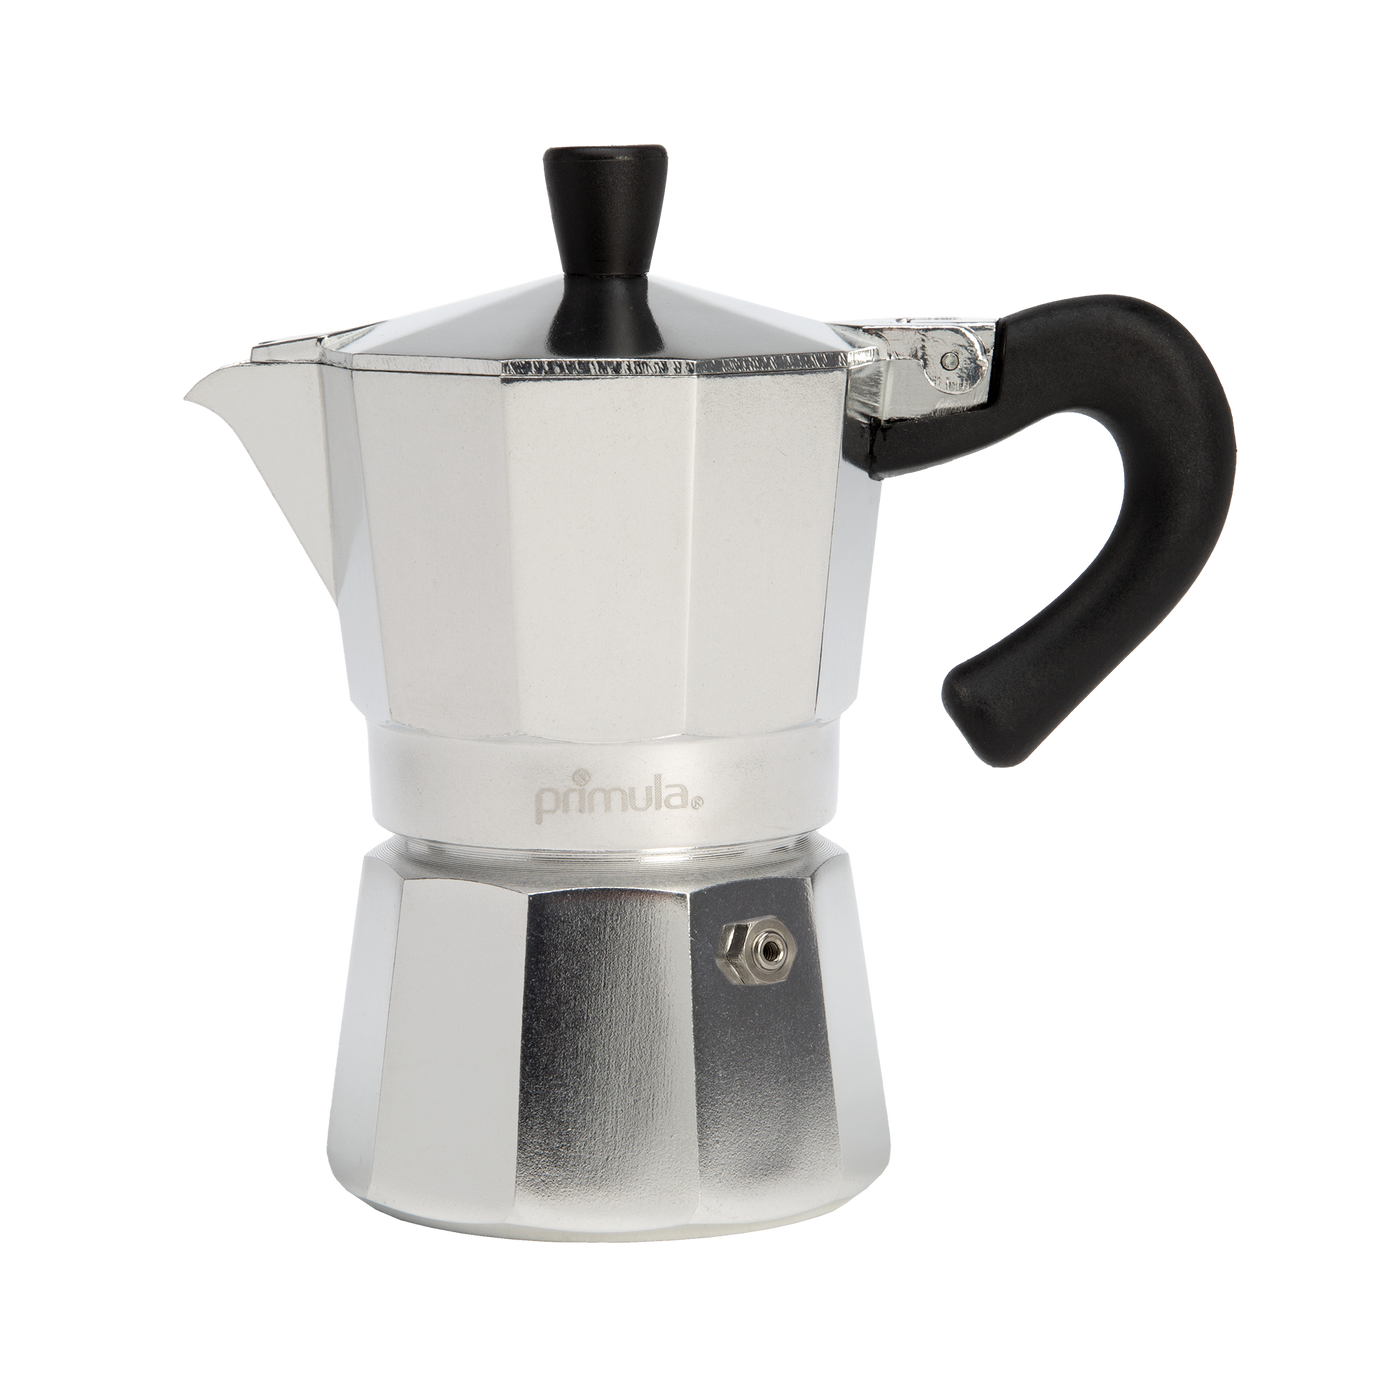  Mocha Coffee Pot Stove Top Espresso Maker Tool,Coffee Maker  Coffee Pot Cup Easy Clean for Home Office Coffee: Home & Kitchen